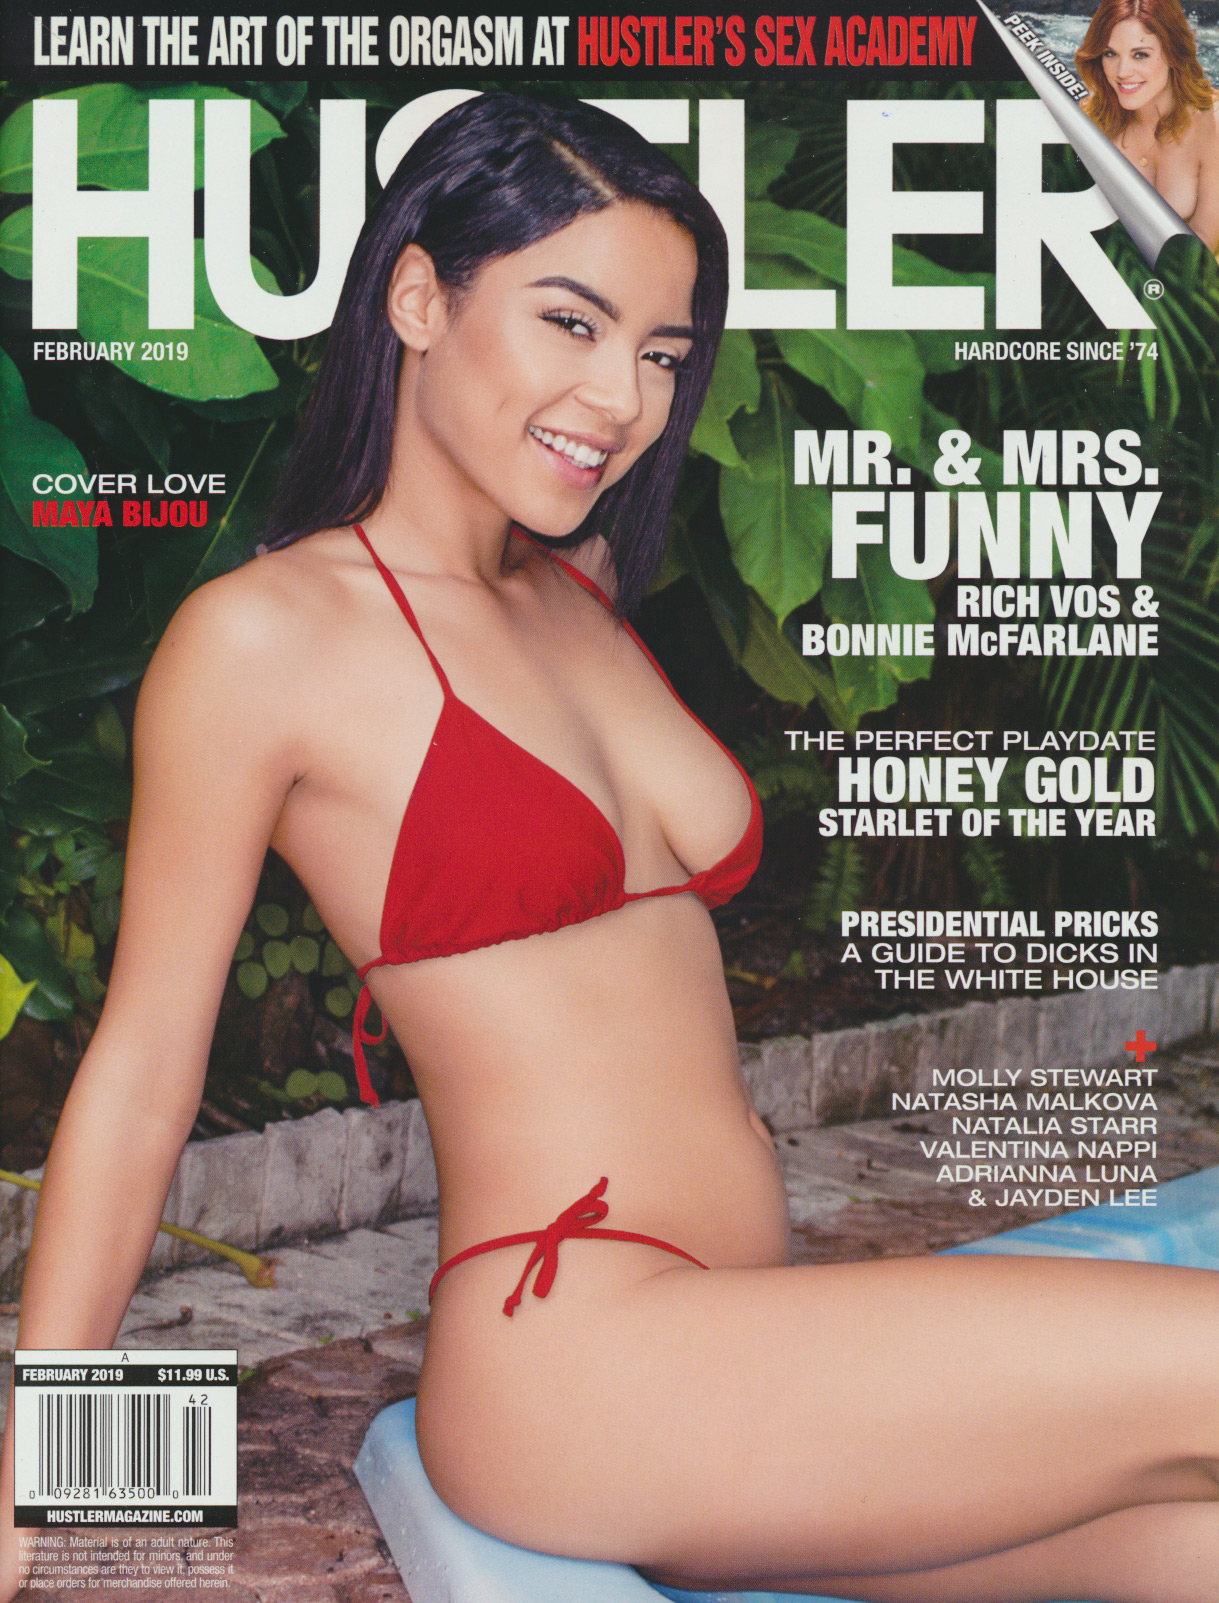 Hustler February 2019 magazine back issue Hustler magizine back copy Hustler February 2019 Adult Pornographic Magazine Back Issue Published by LFP, Larry Flynt Publications. Covergirl & Honey of the Month Maya Bijou (Nude & Centerfold) photographed by Steven Andres.